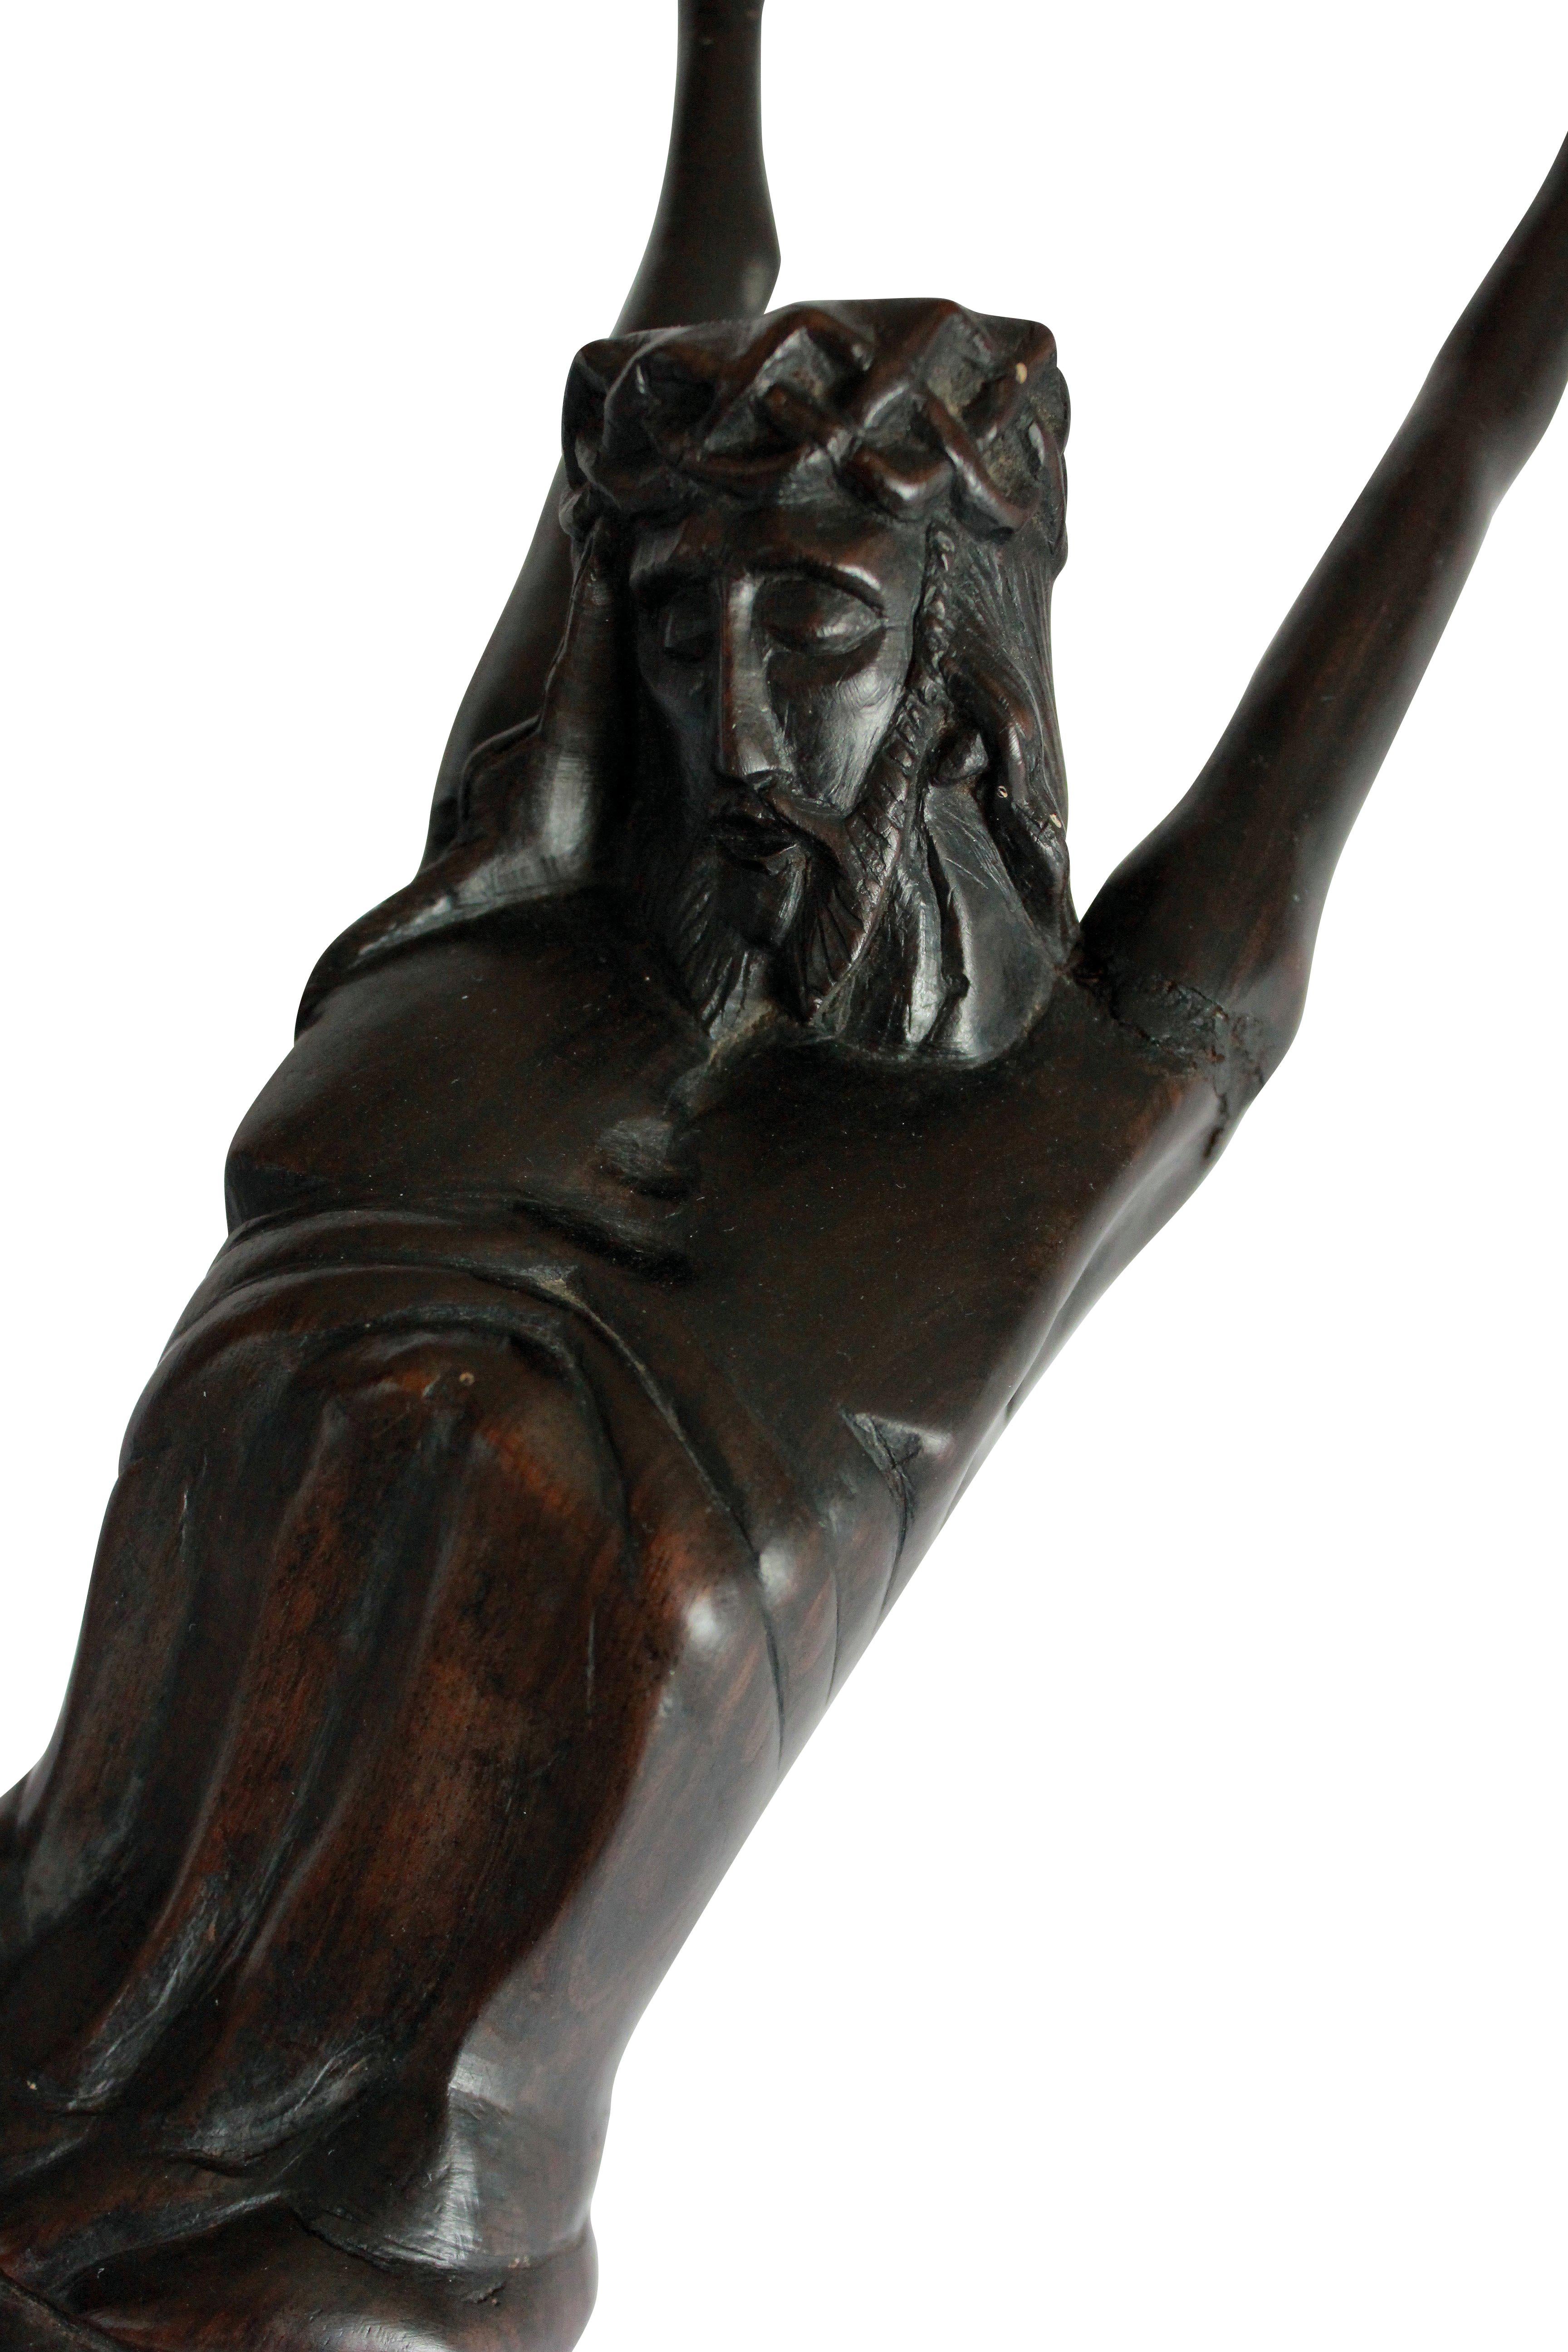 A fine 18th century Indo-Portuguese corpus, carved out of solid ebony. In very good condition with a good patina.